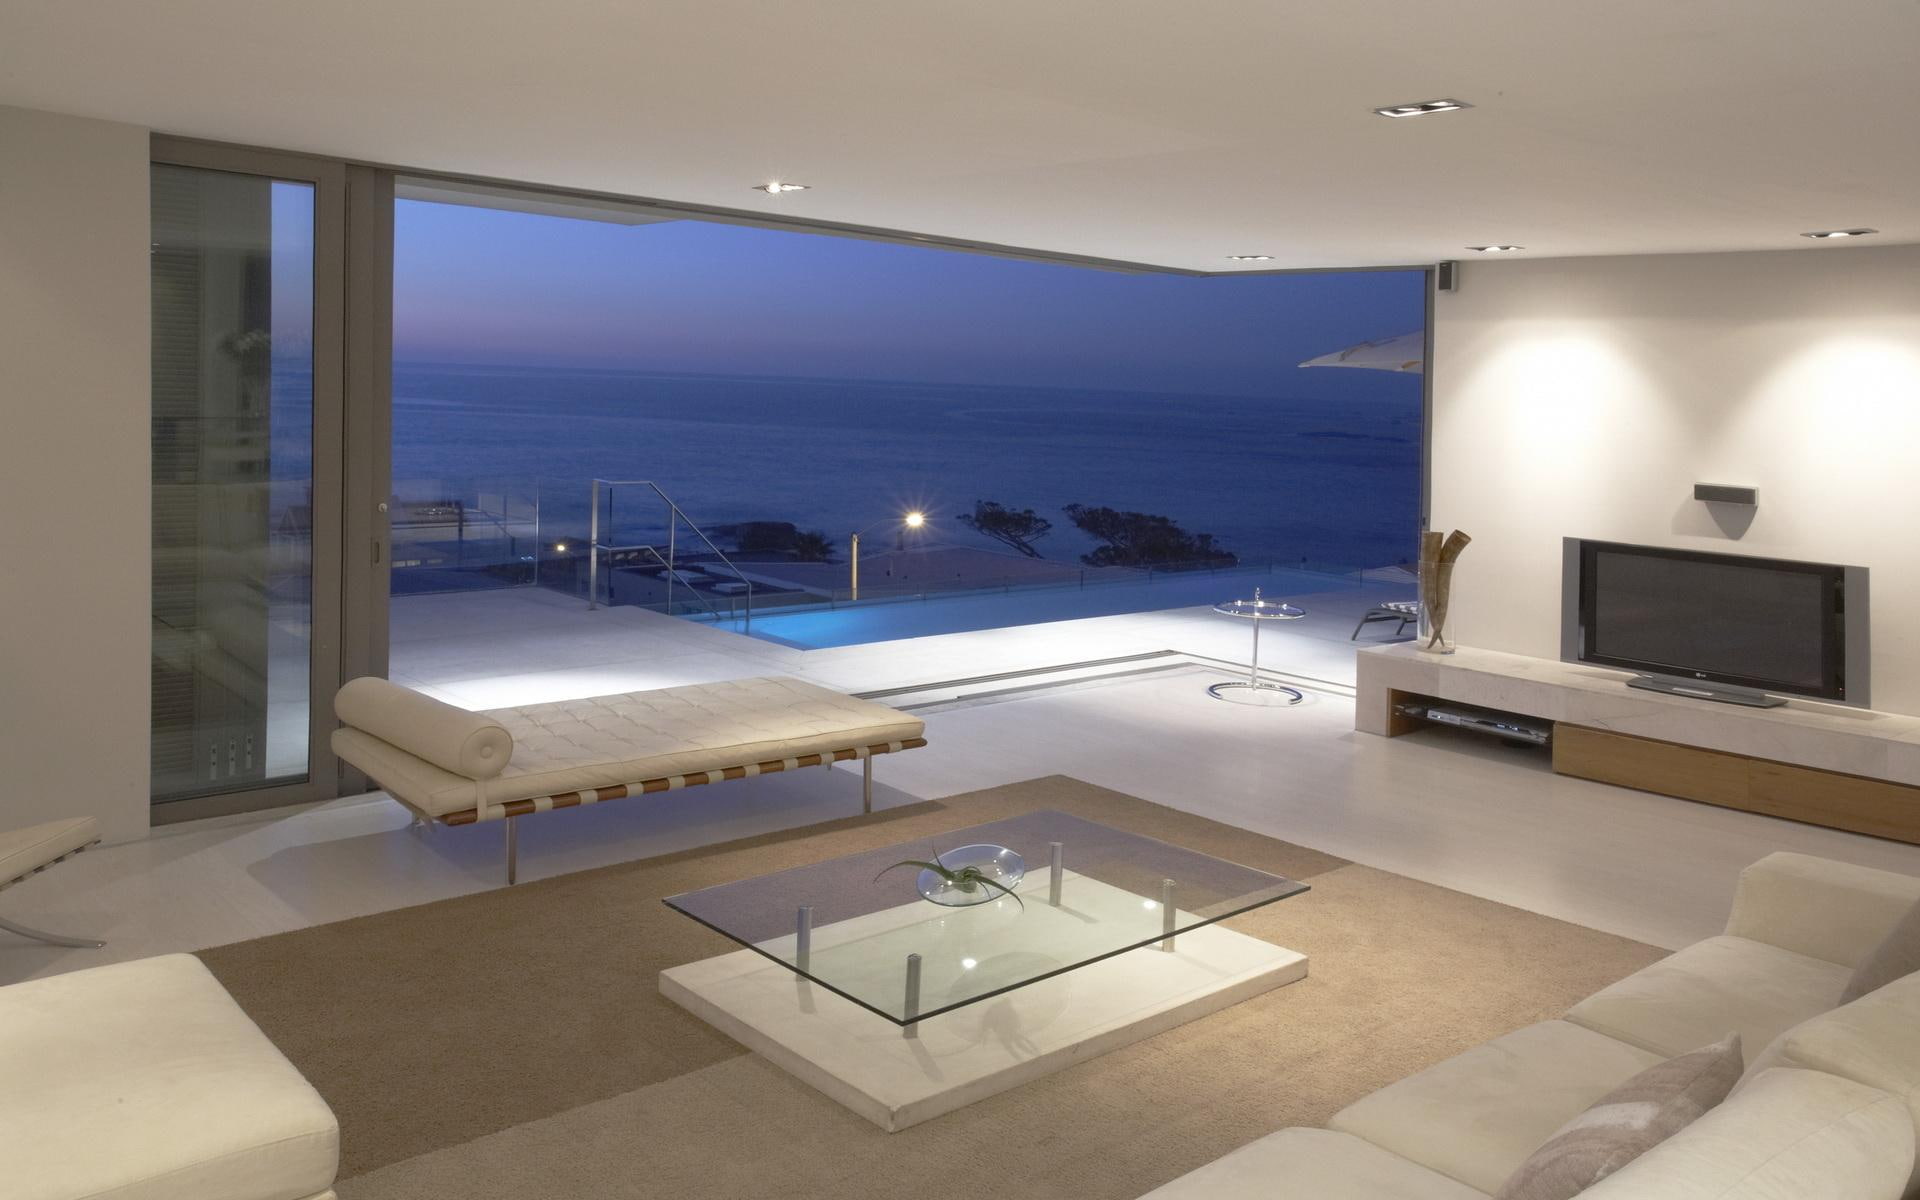 Modern Living Room With Exceptional View, doore, pool, couch